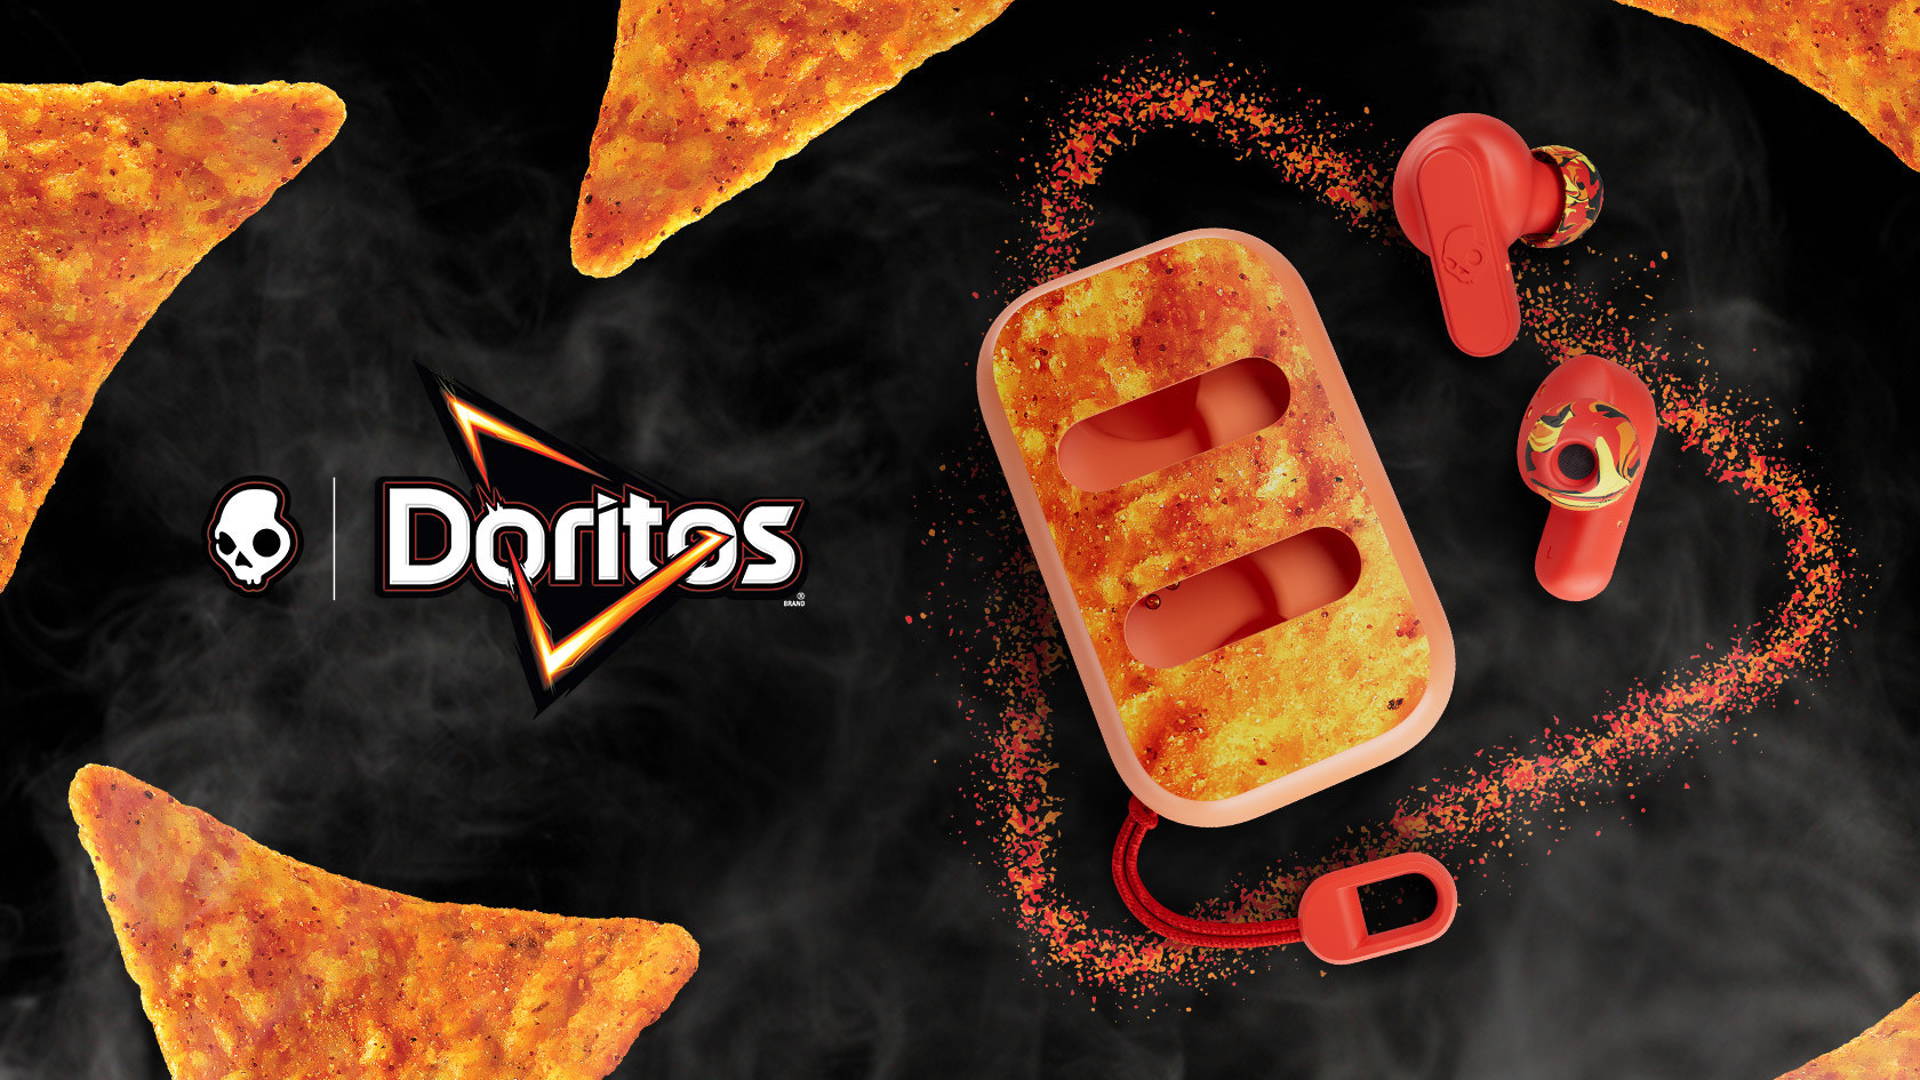 Skullcandy Teams Up With Doritos For Limited Edition 4 20 Drop. Dieline, Branding & Packaging Inspiration